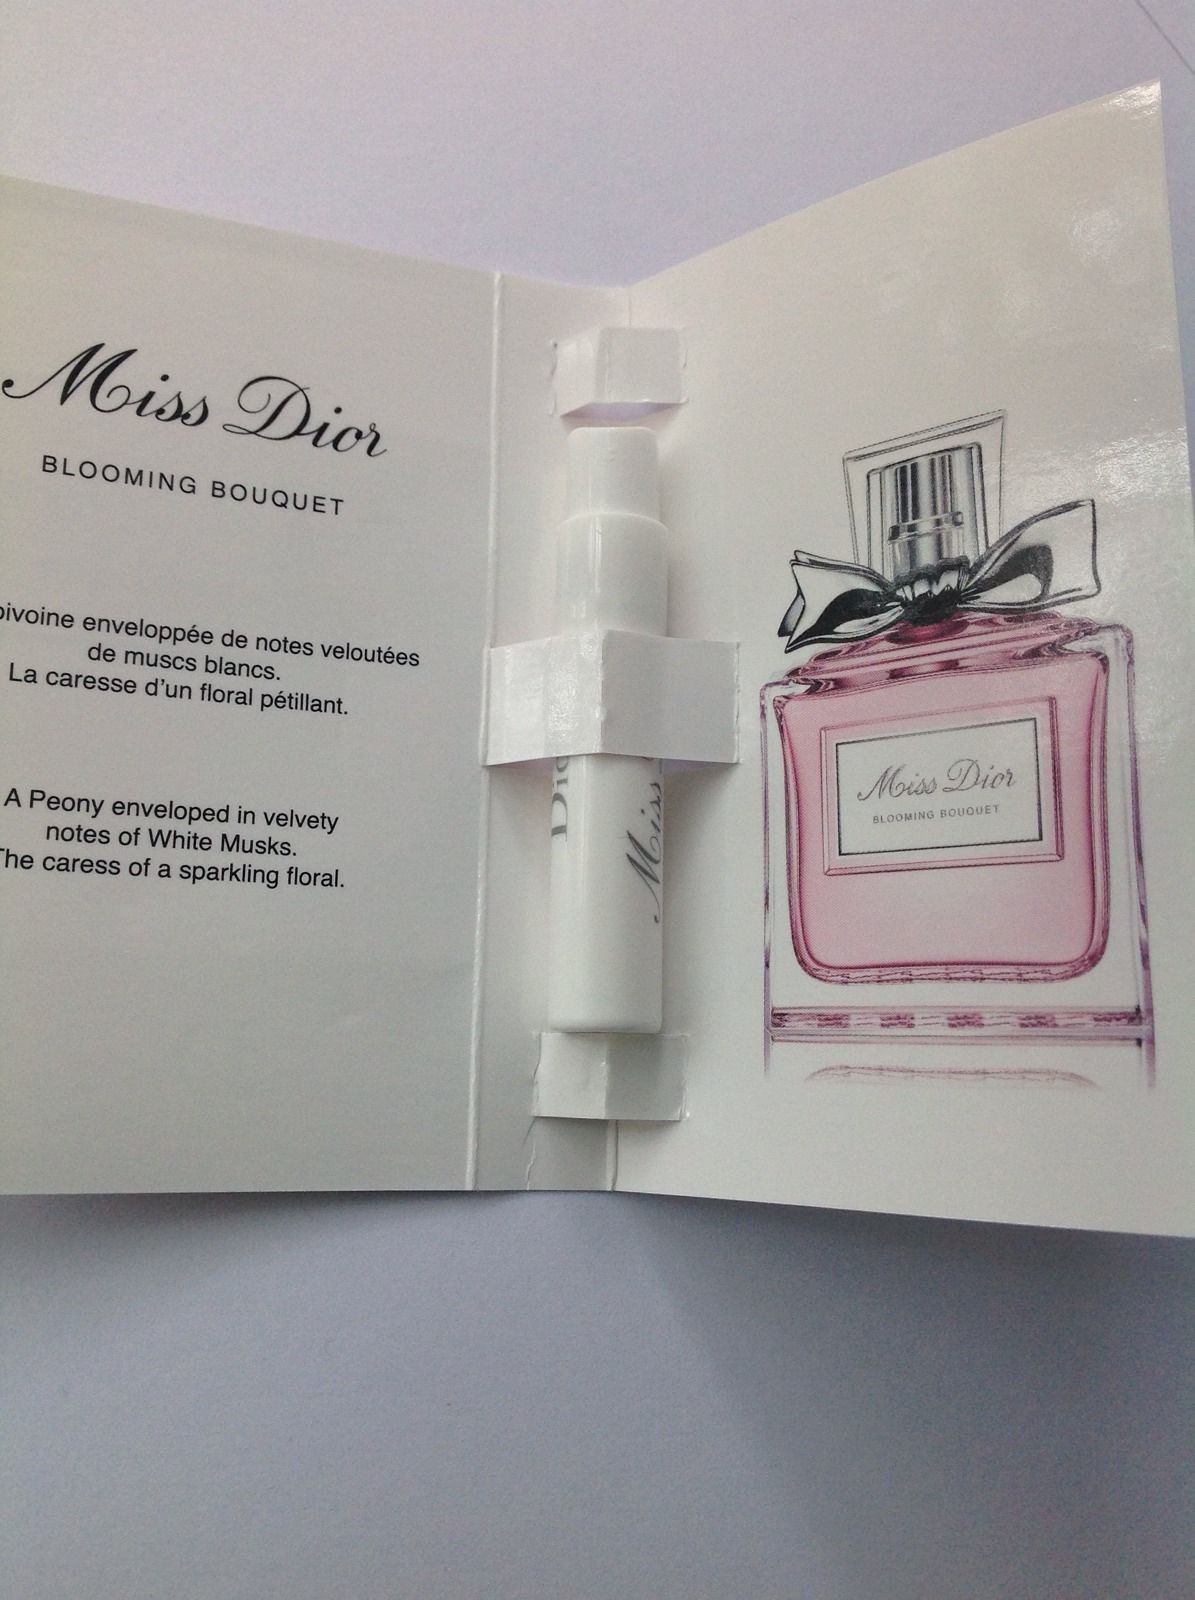 Dior-Miss-Dior-Blooming-Bouquet-Perfume-Samples